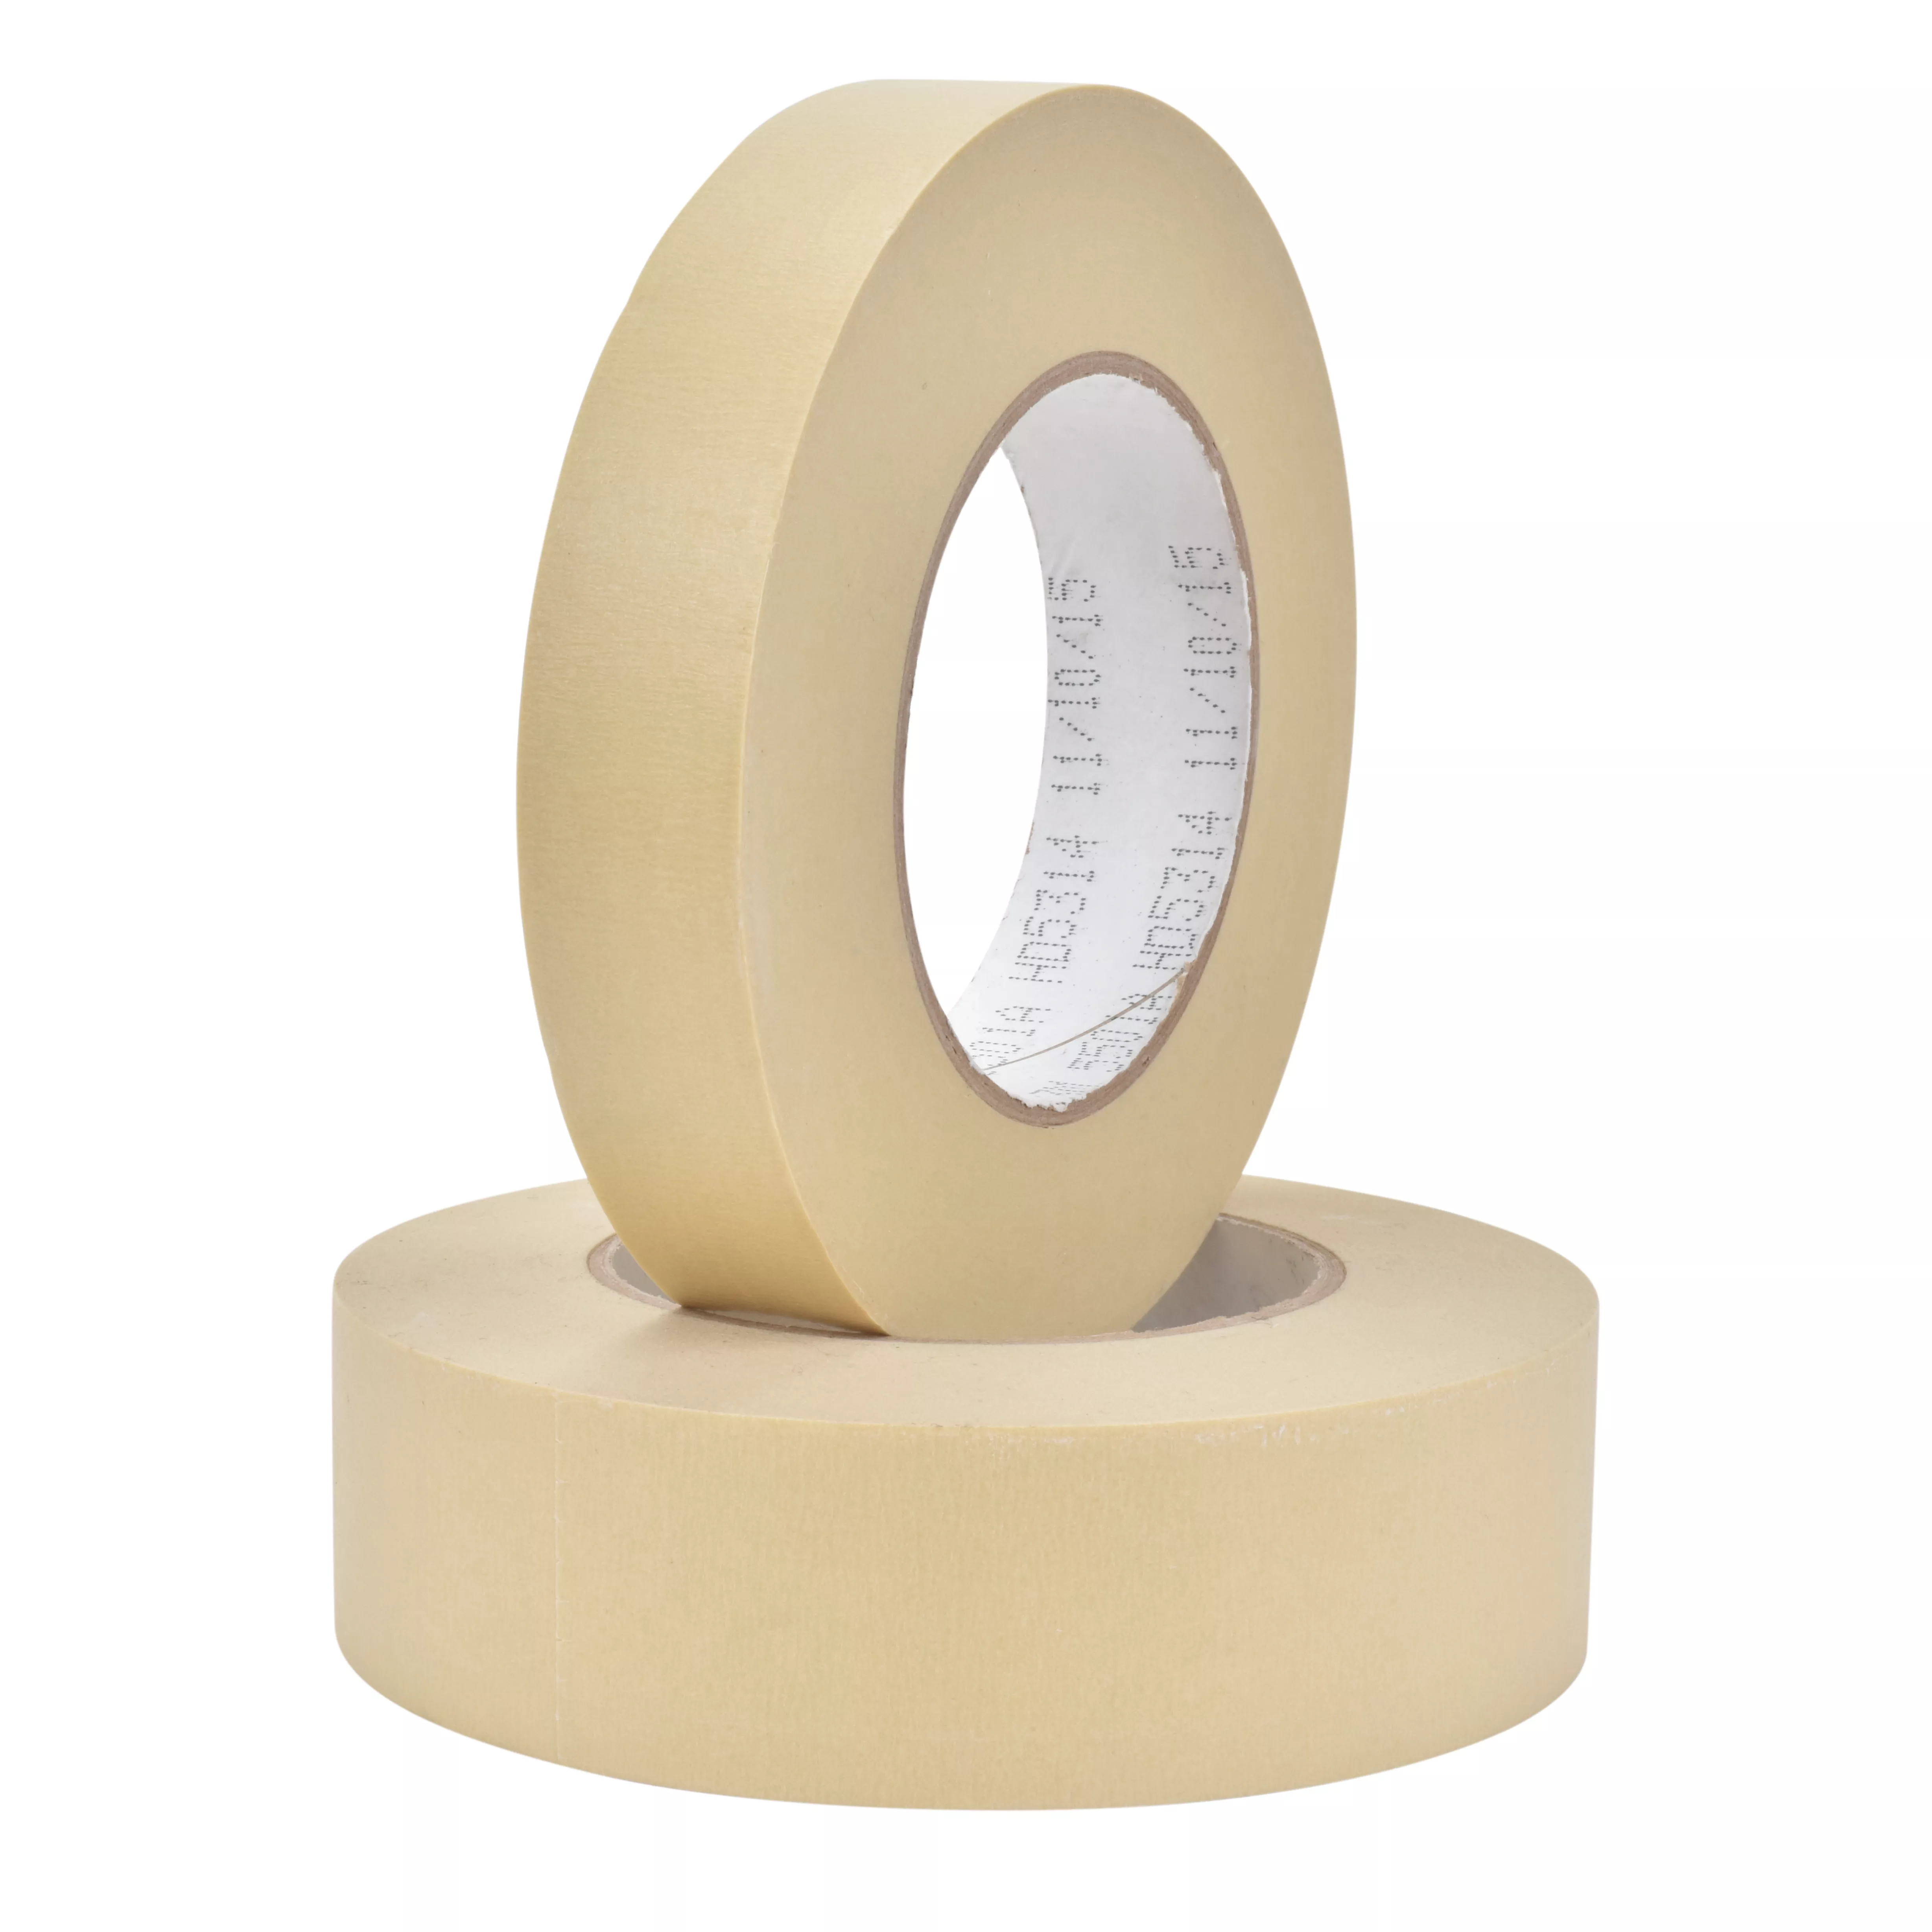 Product Number 5501A | 3M™ Specialty High Temperature Masking Tape 5501A